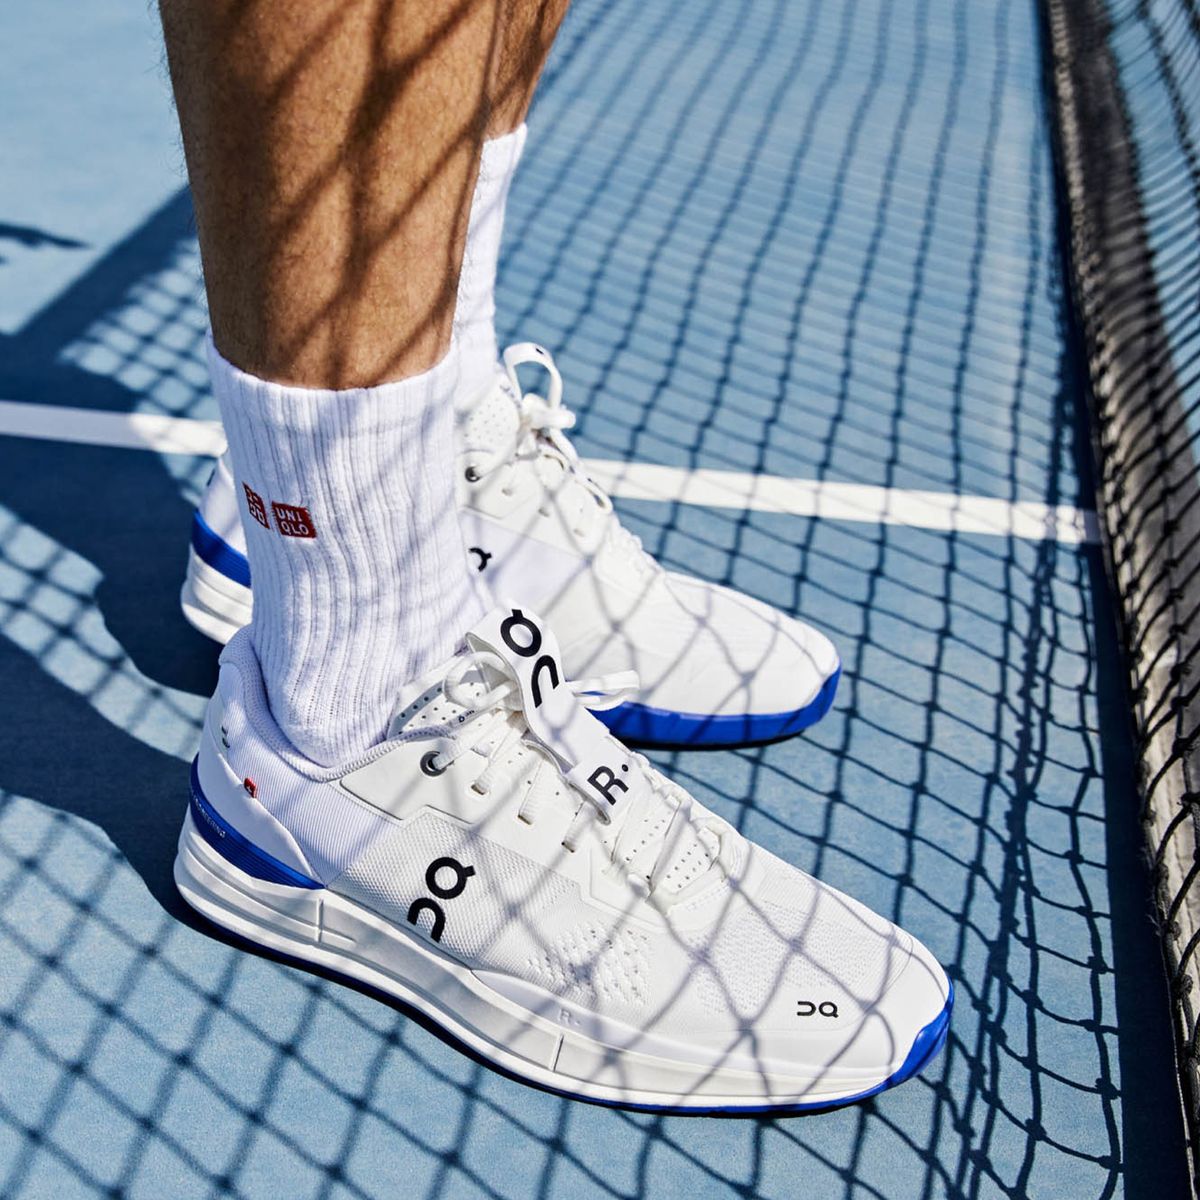 Roger Federer's Exclusive Tennis Shoe Is Finally Back in Stock